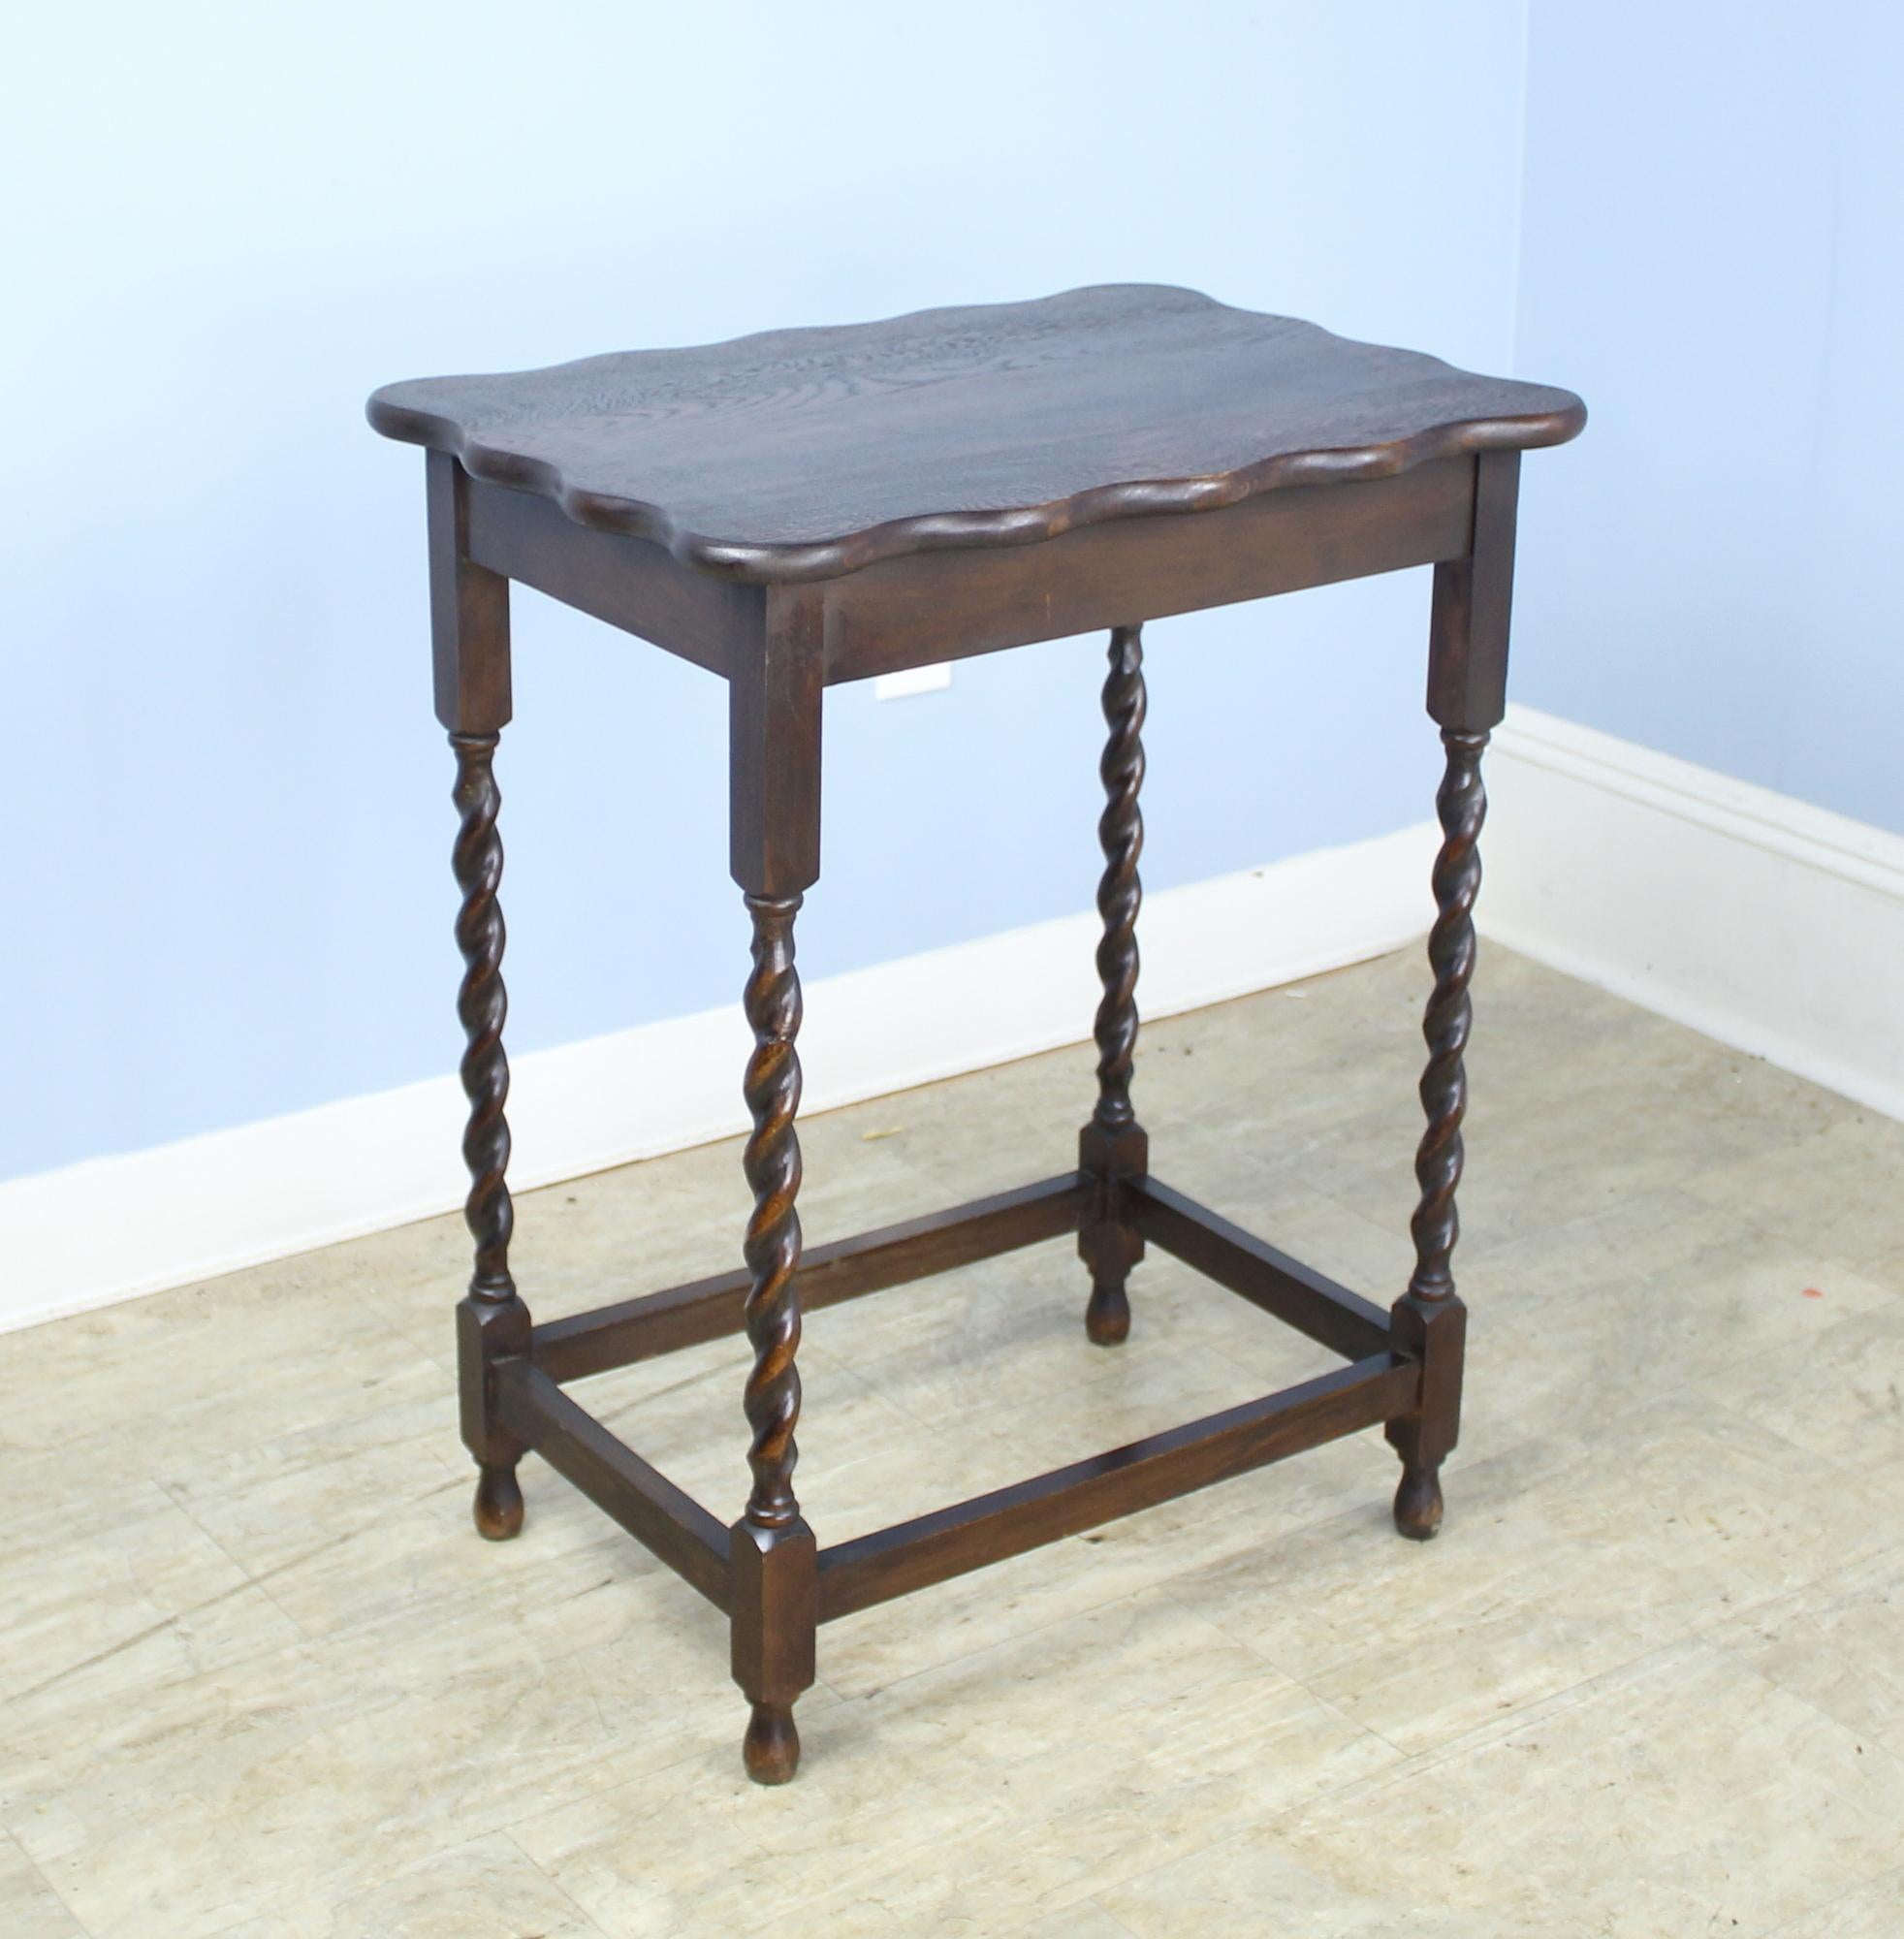 A charming simple occasional table in dark oak with eye-catching barley twist detail. Would make a nice lamp table and would pair nicely on either side of a sofa or guest bed with our other scalloped edge, barley twist side table reference